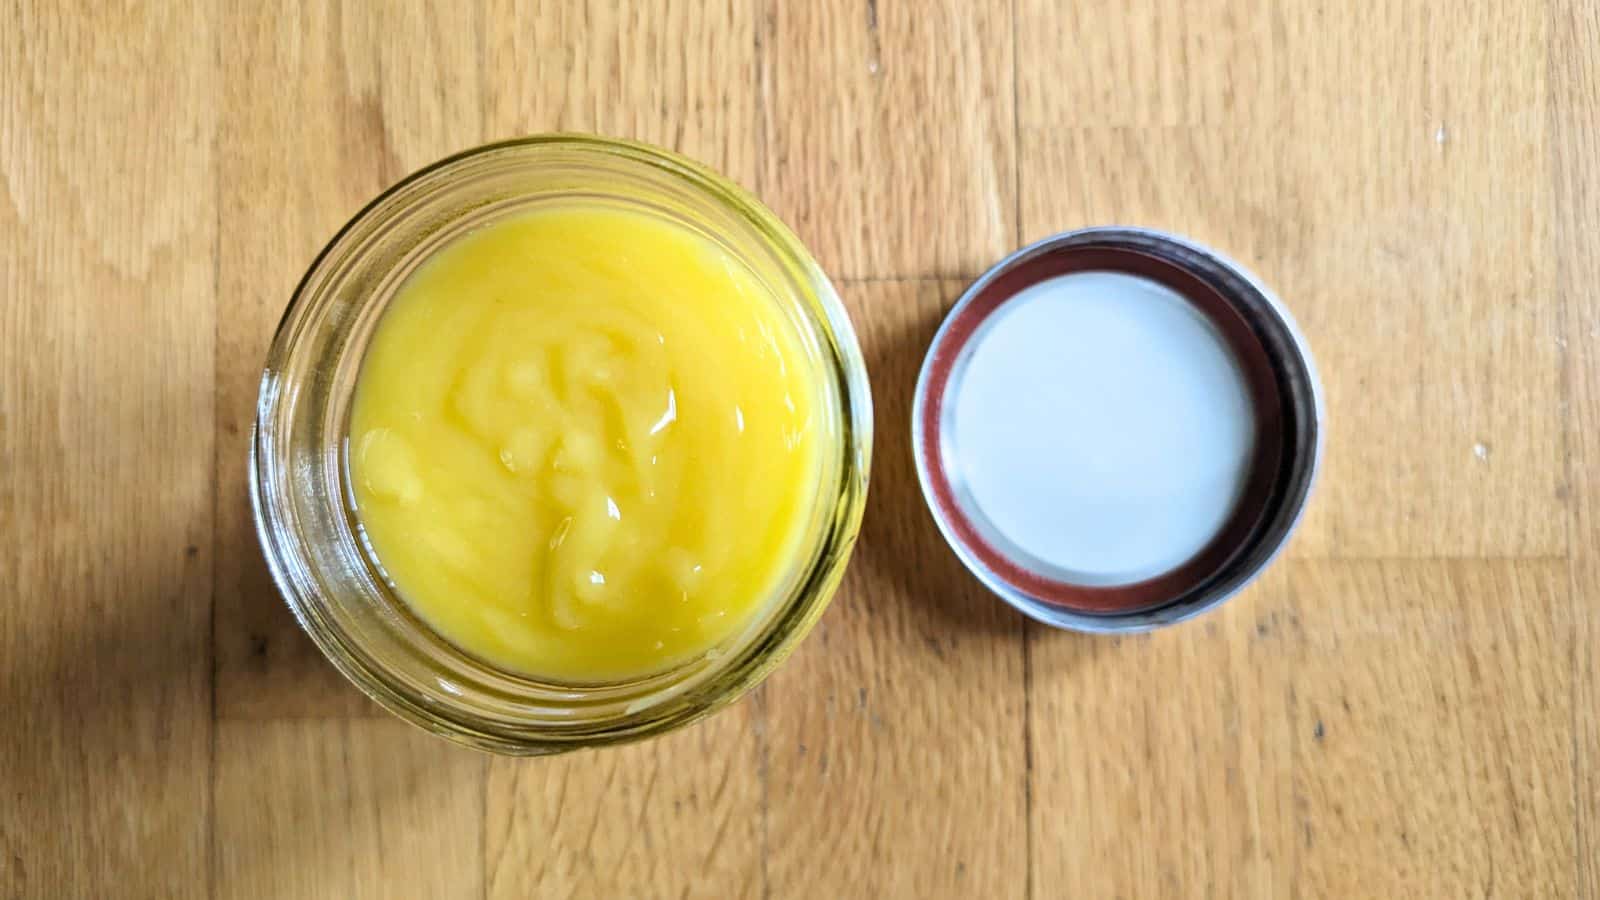 Image shows a spoon dipping into a jar of Lemon Curd.